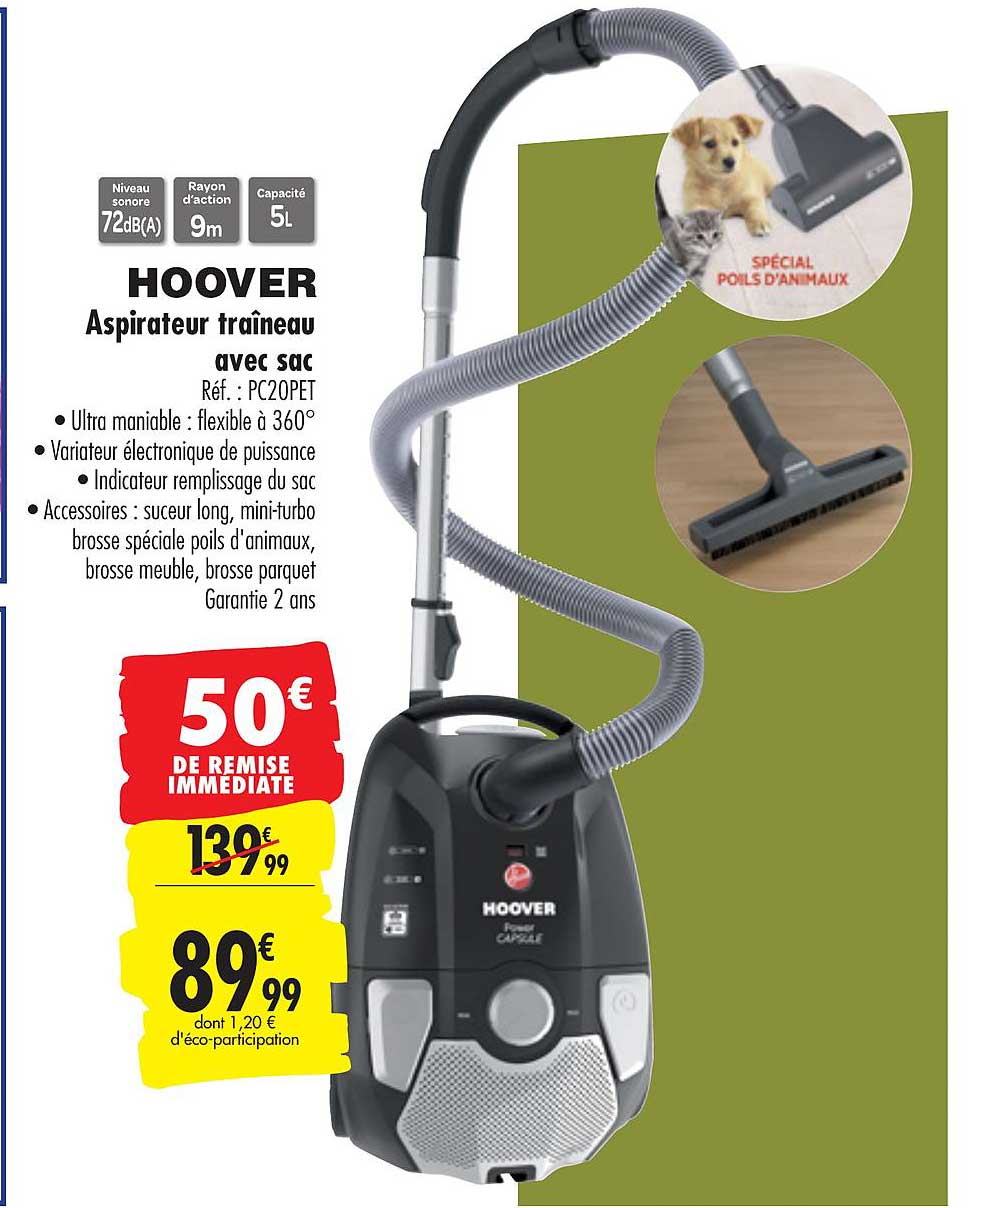 Featured image of post Sac Aspirateur Hoover Brave L aspirateur avec sac pc10par de hoover l aspirateur avec sac pc10par est ultra performant sur sols durs